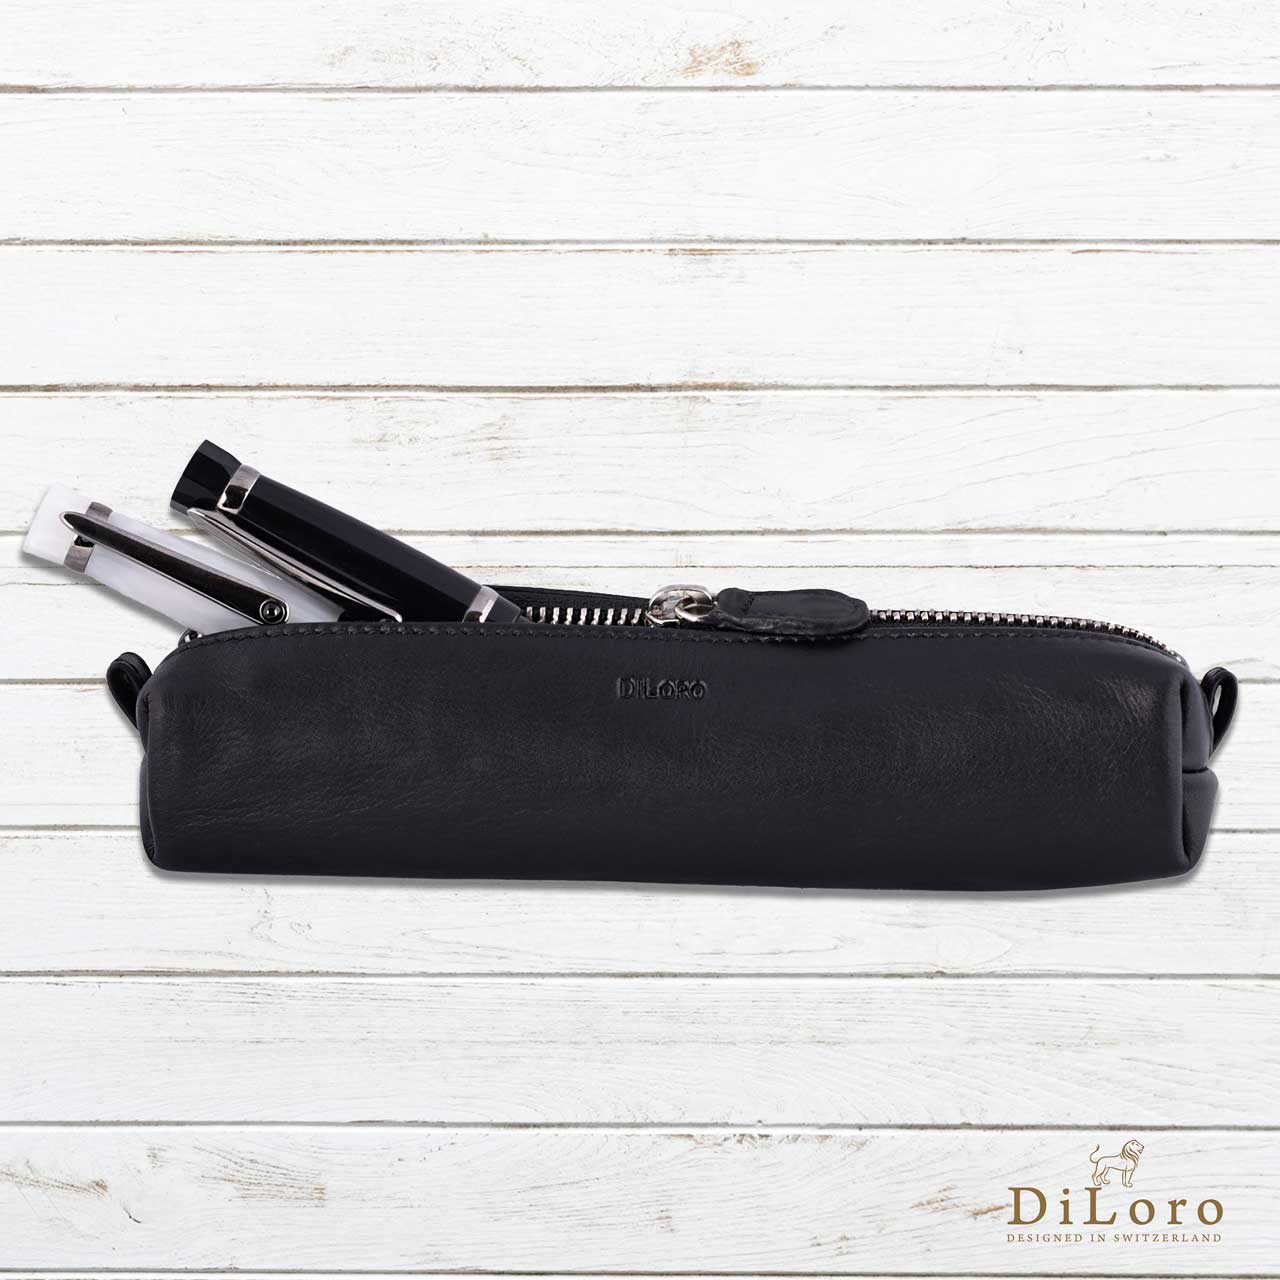 DiLoro Pen & Pencil Case: YKK zippered pencil, pen case made from top quality, full grain nappa leather. Ideal for when you travel to keep your favorite pen, pencils, fountain pen, calligraphy pens, gel pens, stylus pen protected from getting scratched up